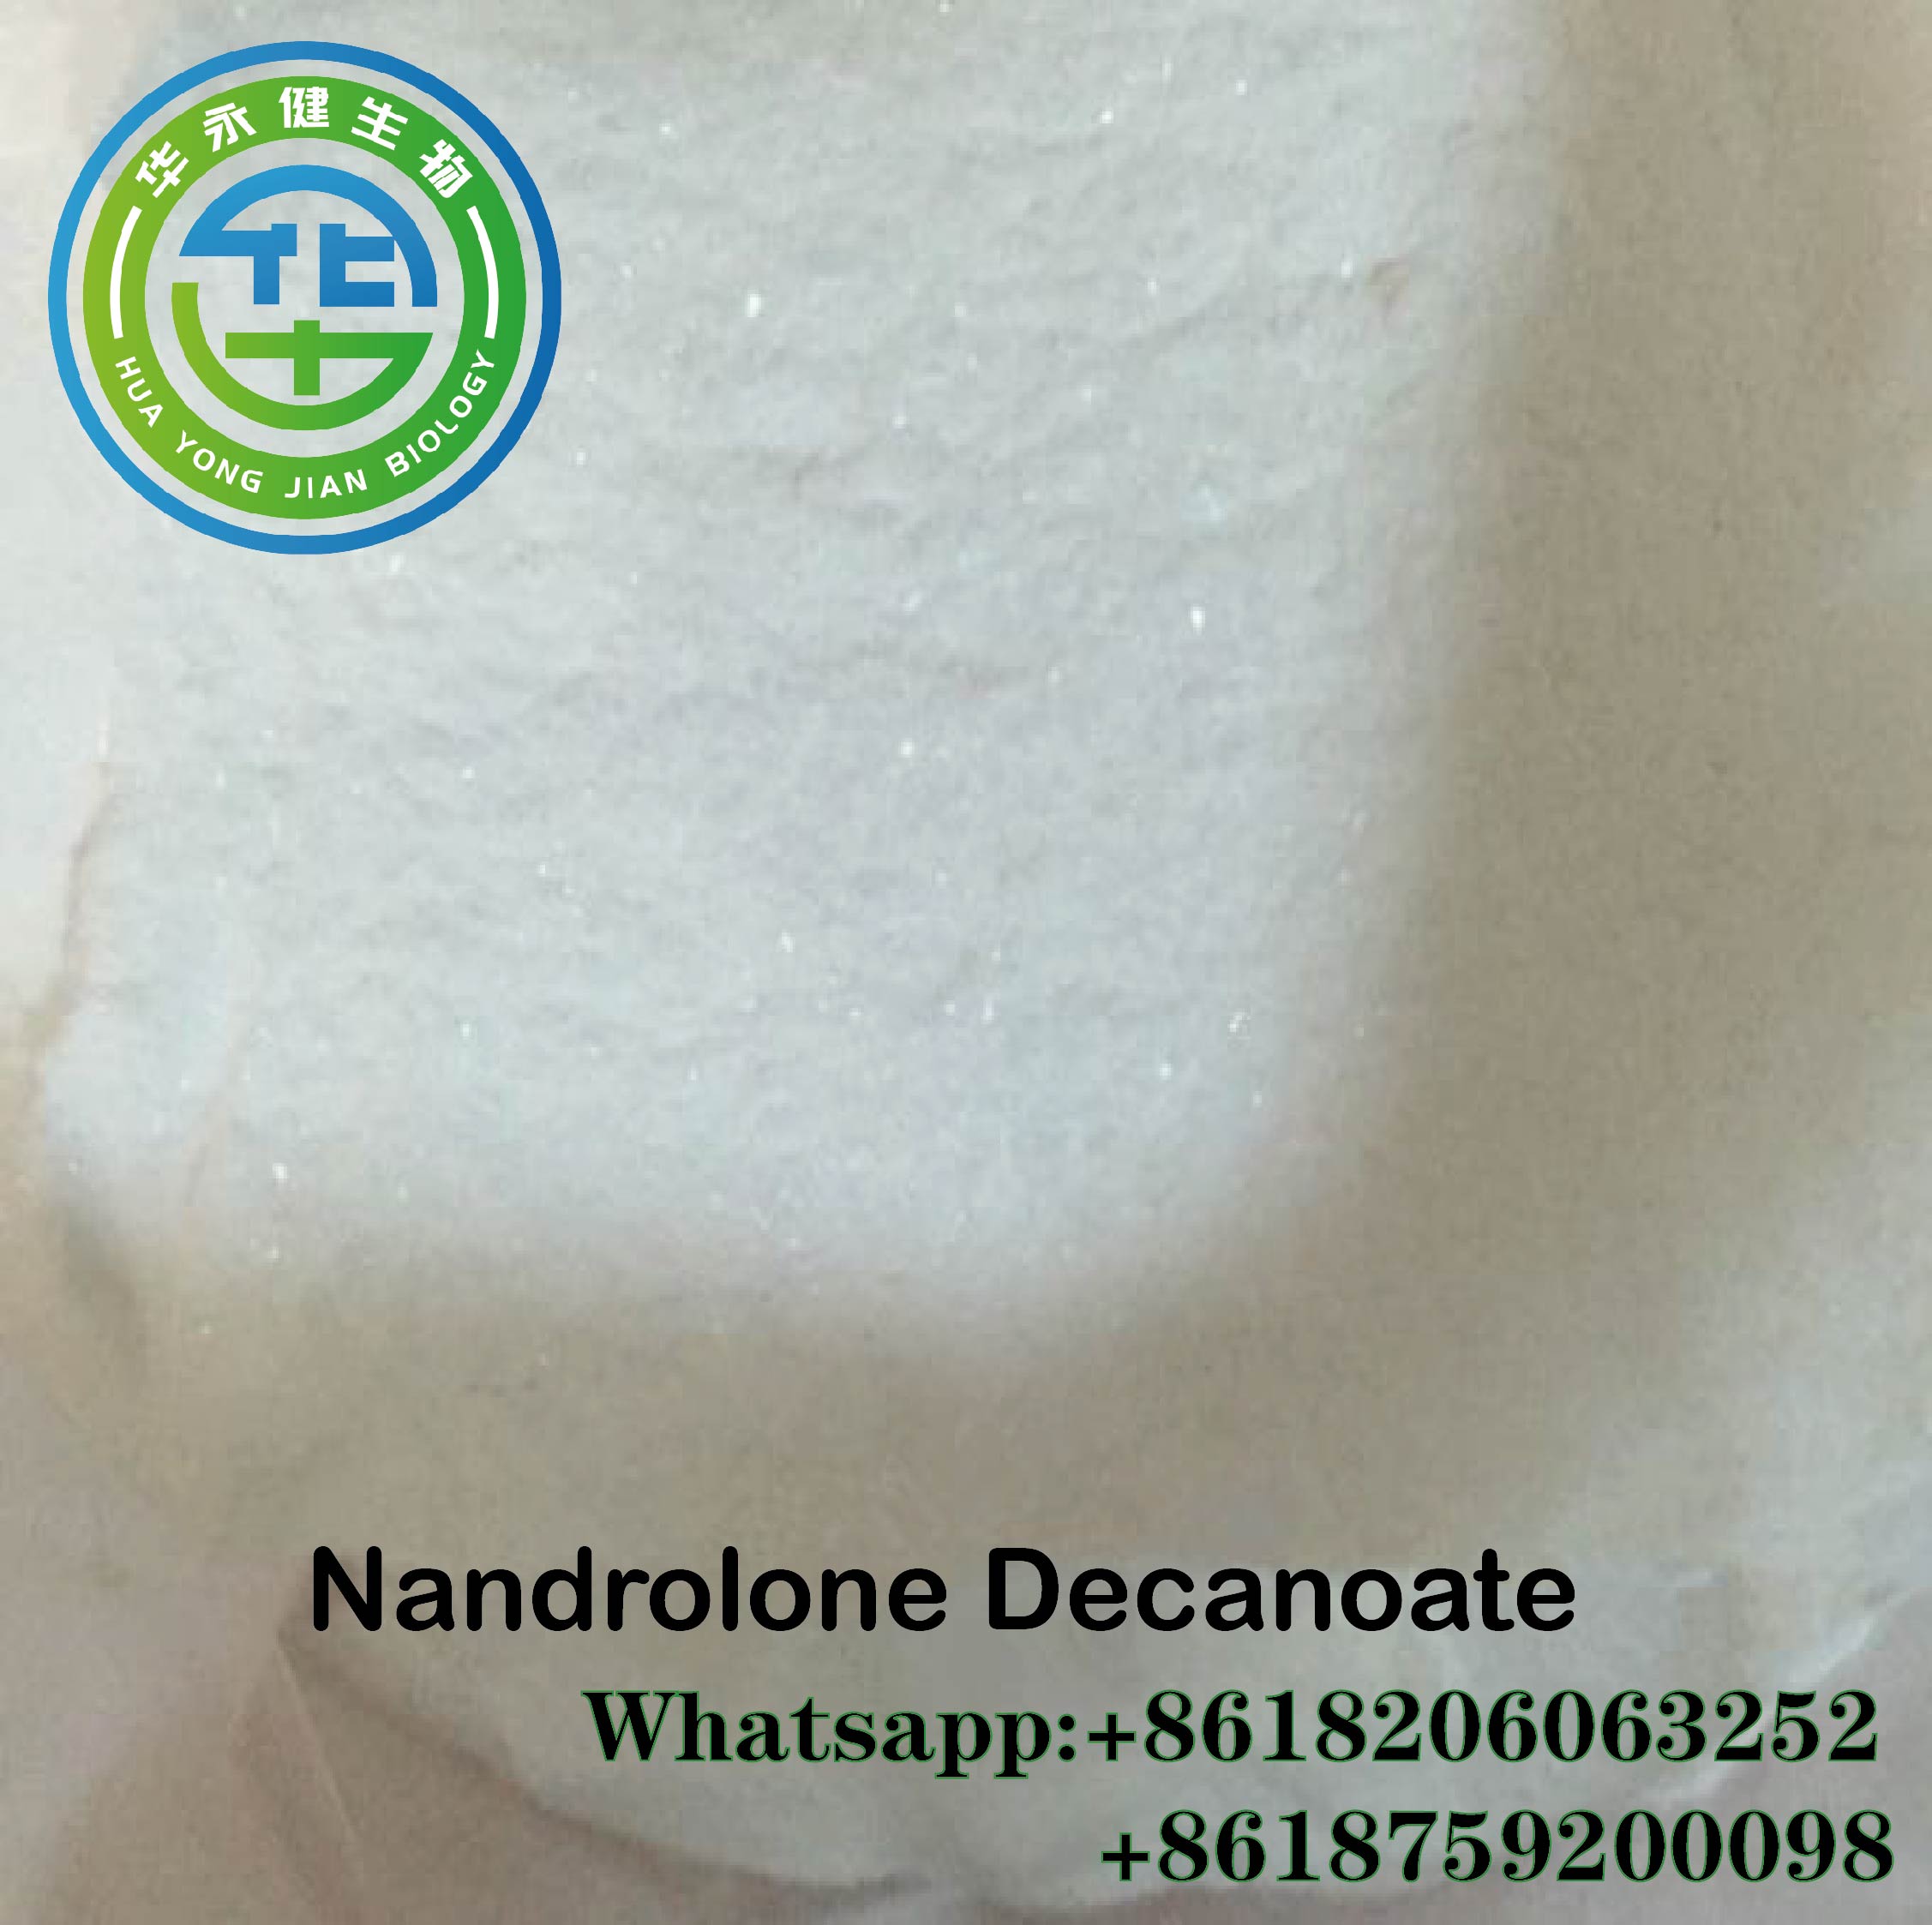 Deca Durabolin Steroid Powder Bodybuilding Supplements Nandrolone Decanoate CAS 360-70-3 Featured Image